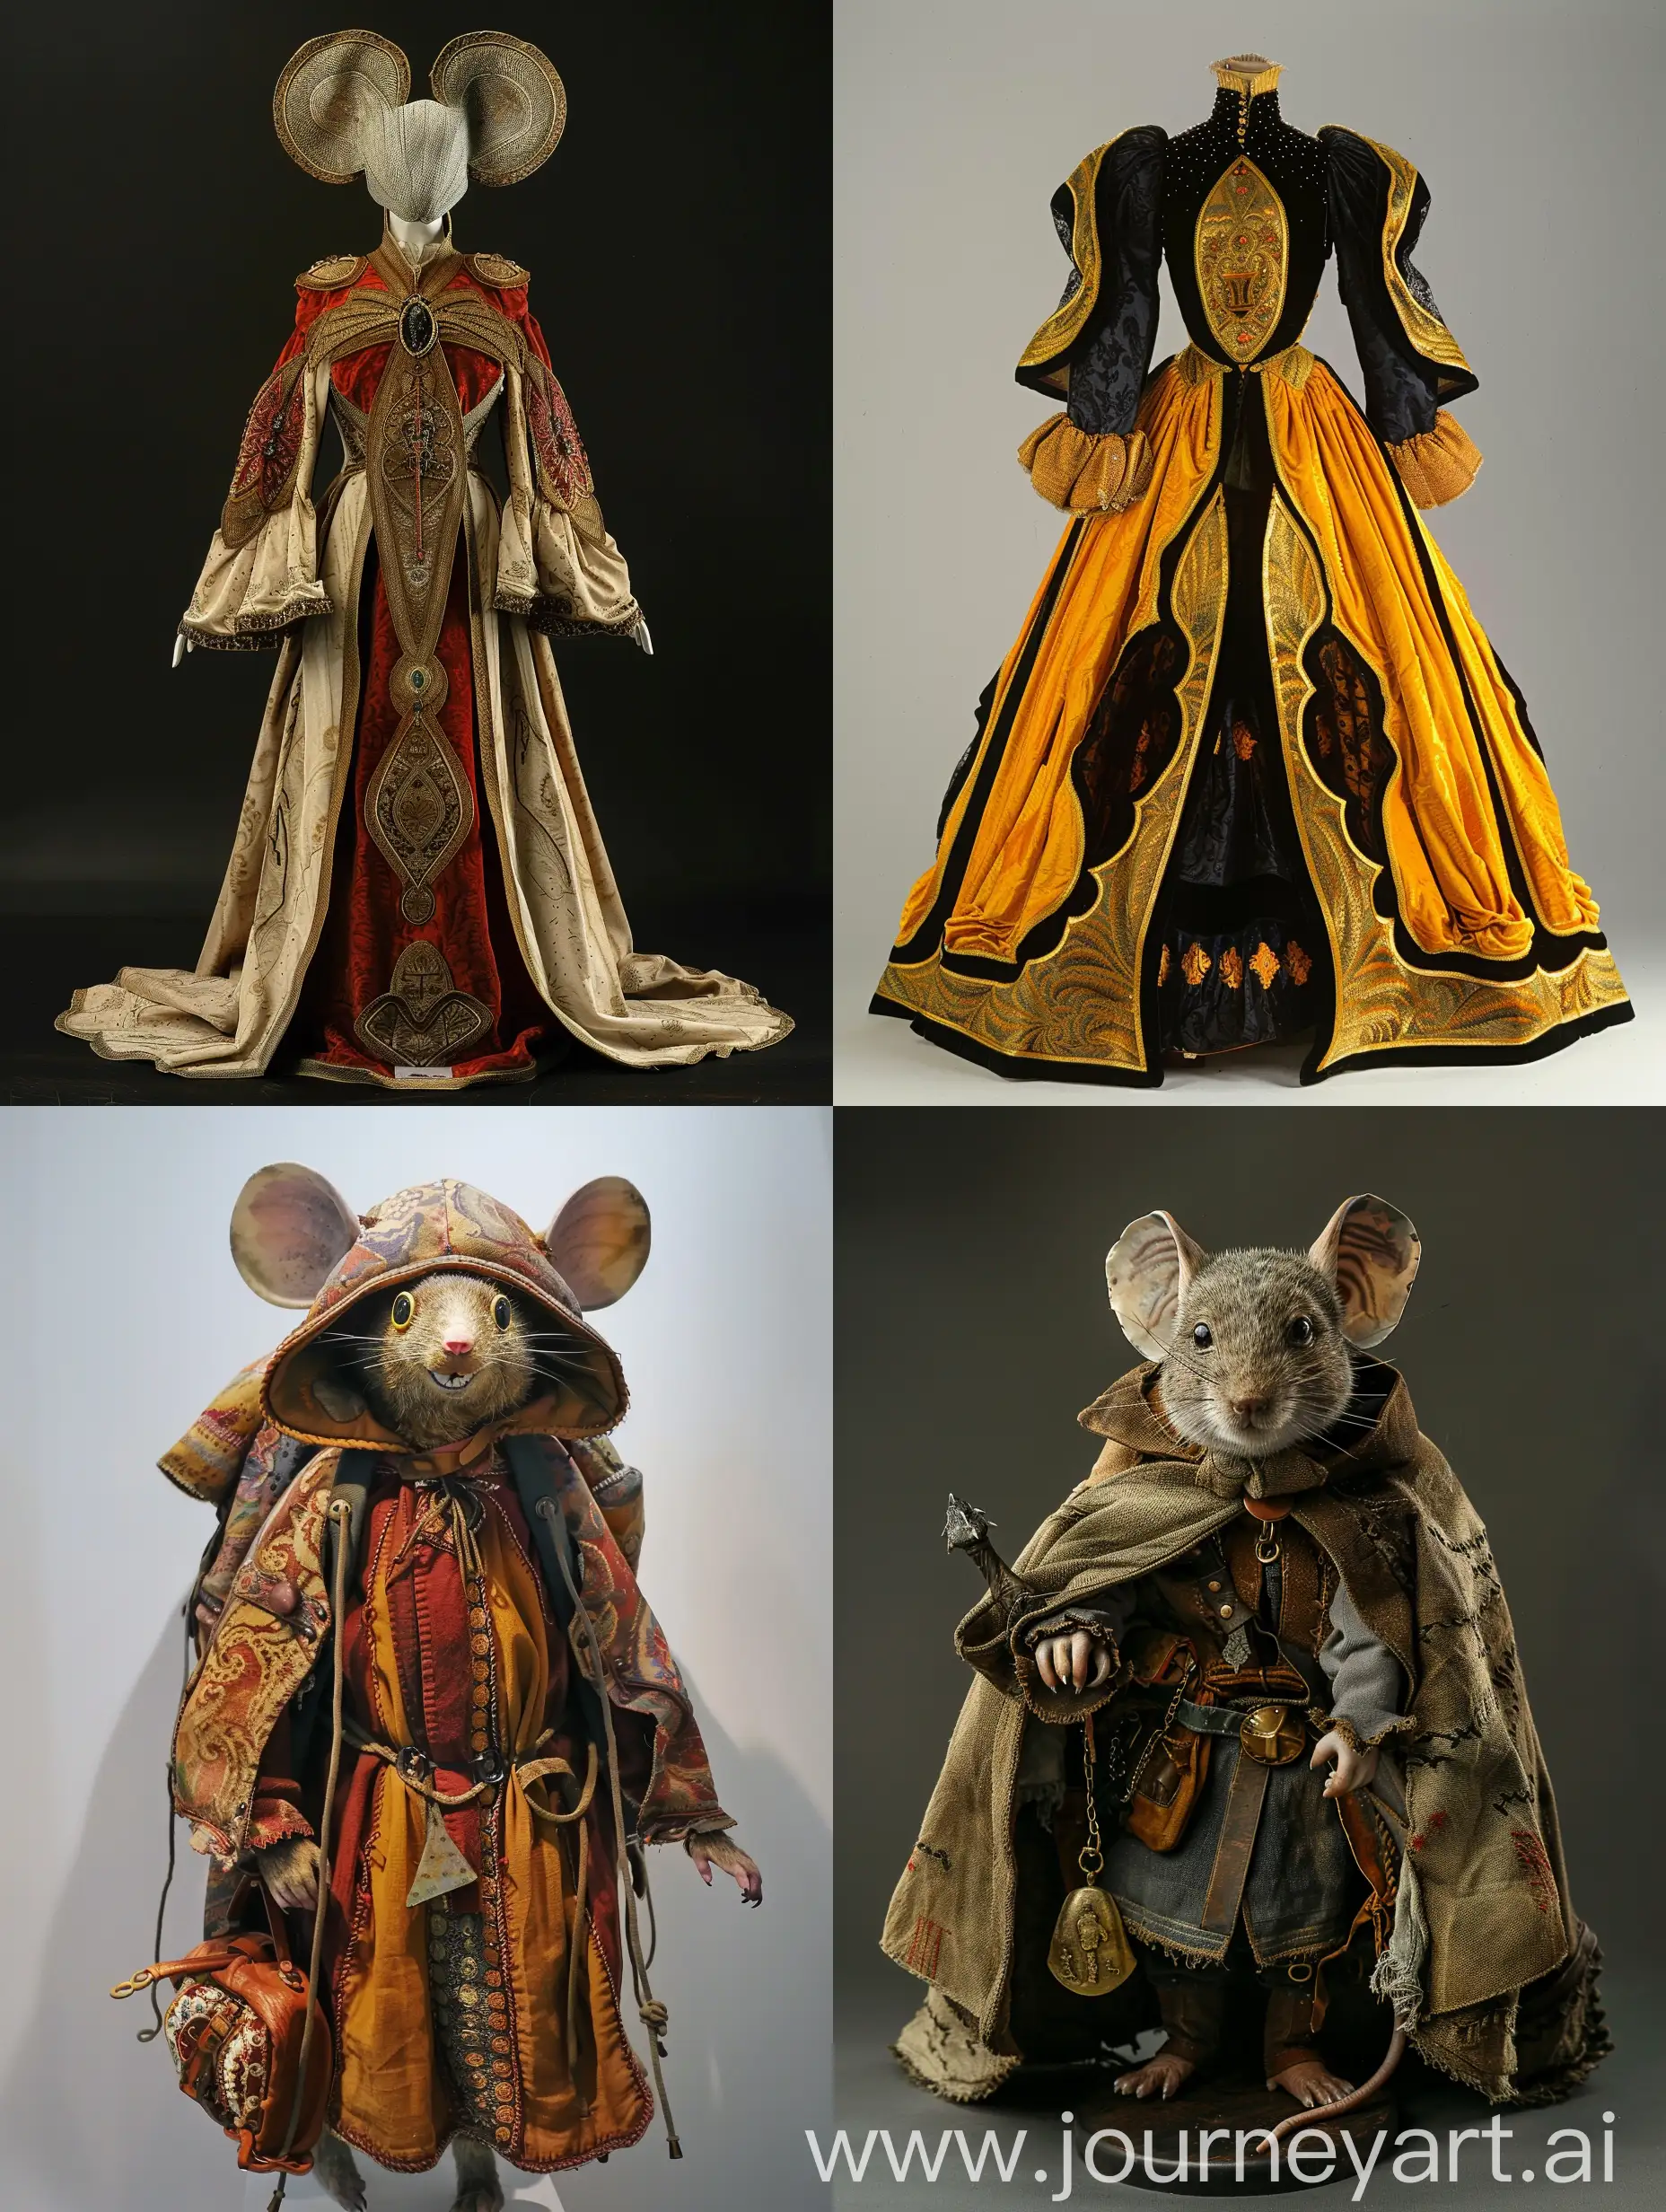 A costume for the holder of the miraculous of the mouse